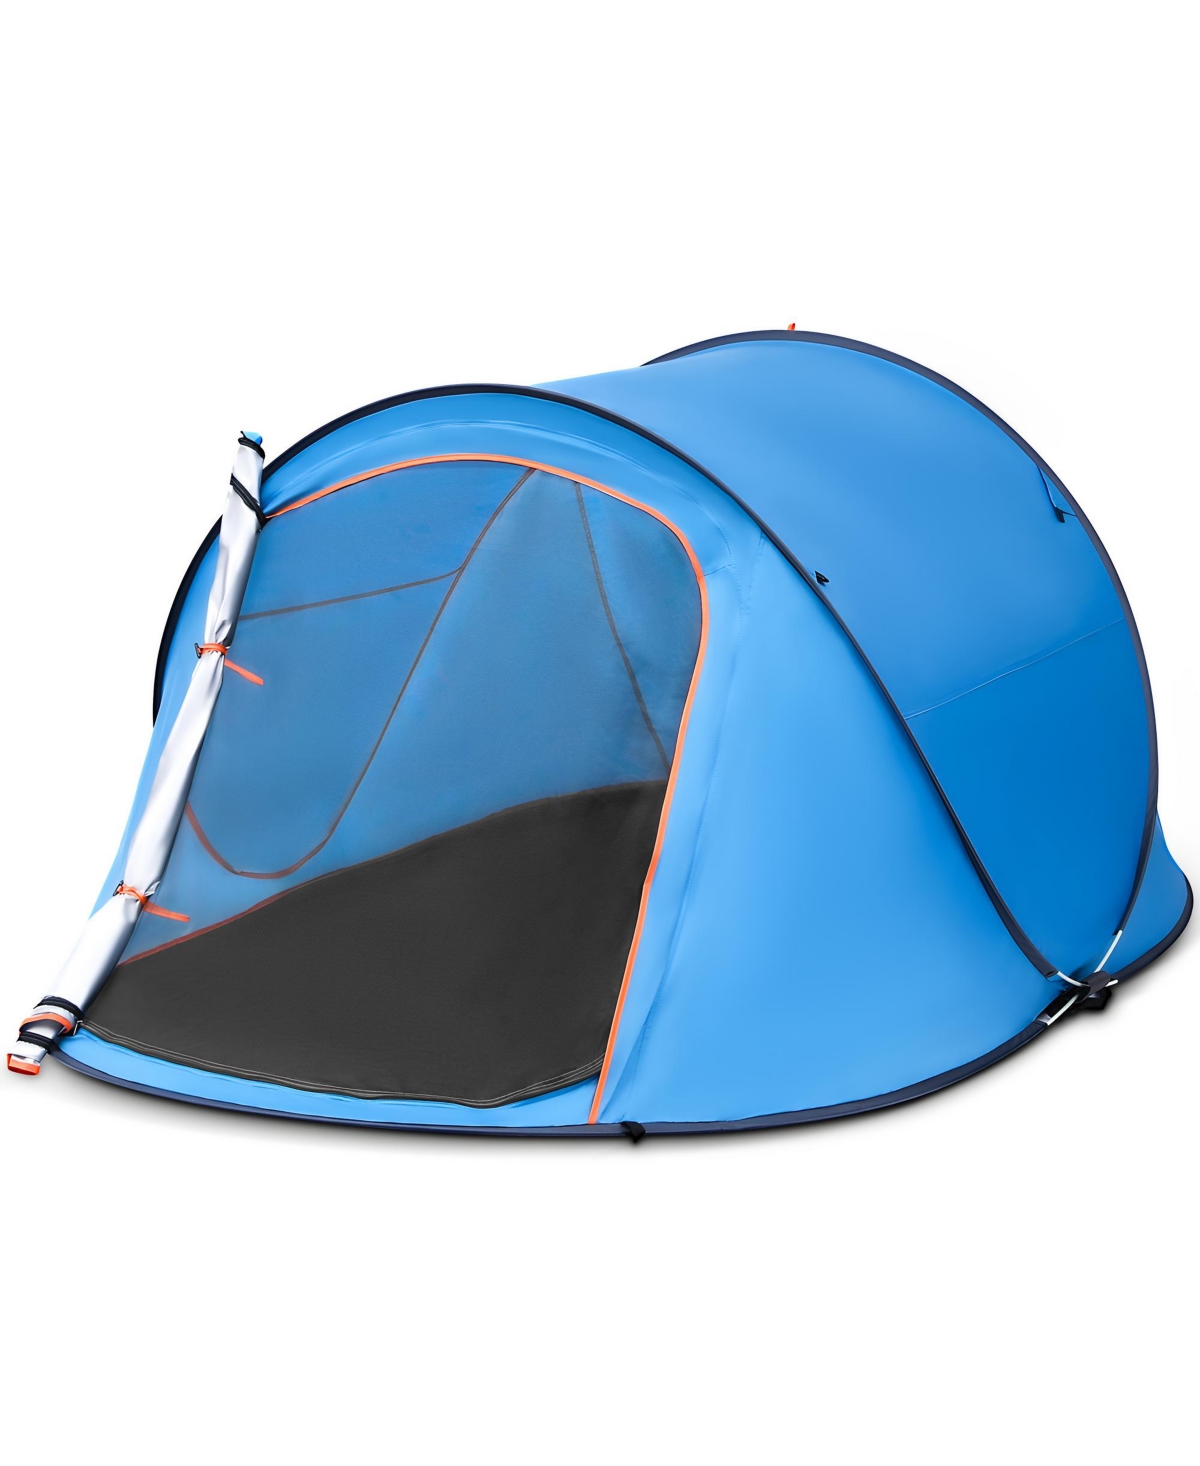 2 Person Instant Pop-up Tent Waterproof Family Camping Tent with Carrying Bag - Blue